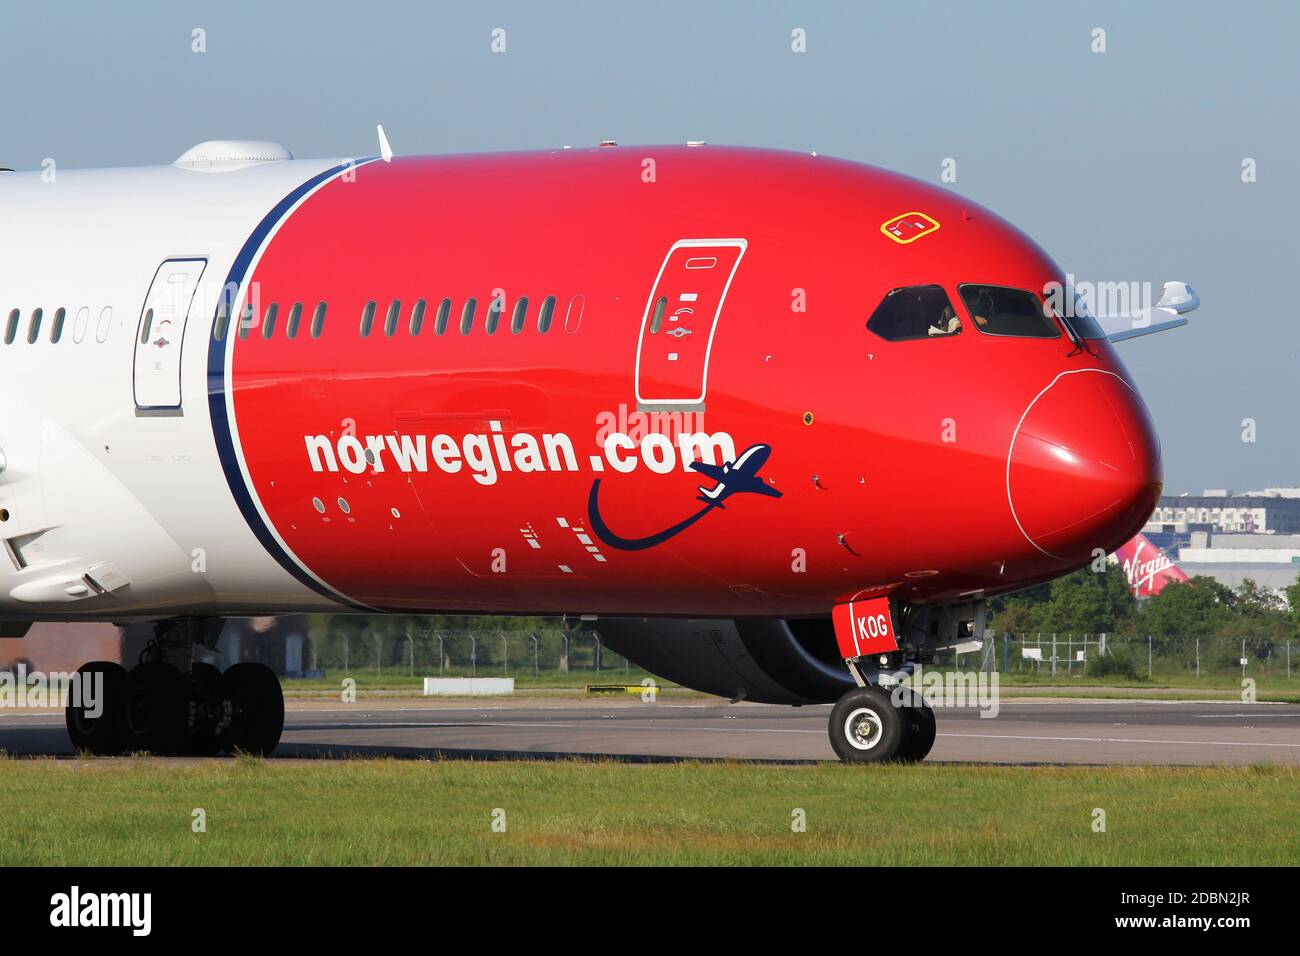 Norwegian Boeing 787 Dreamliner at London Gatwick airport. Norwegian announced on 14 January 2021 that it would end longhaul flying and retire the 787 Stock Photo